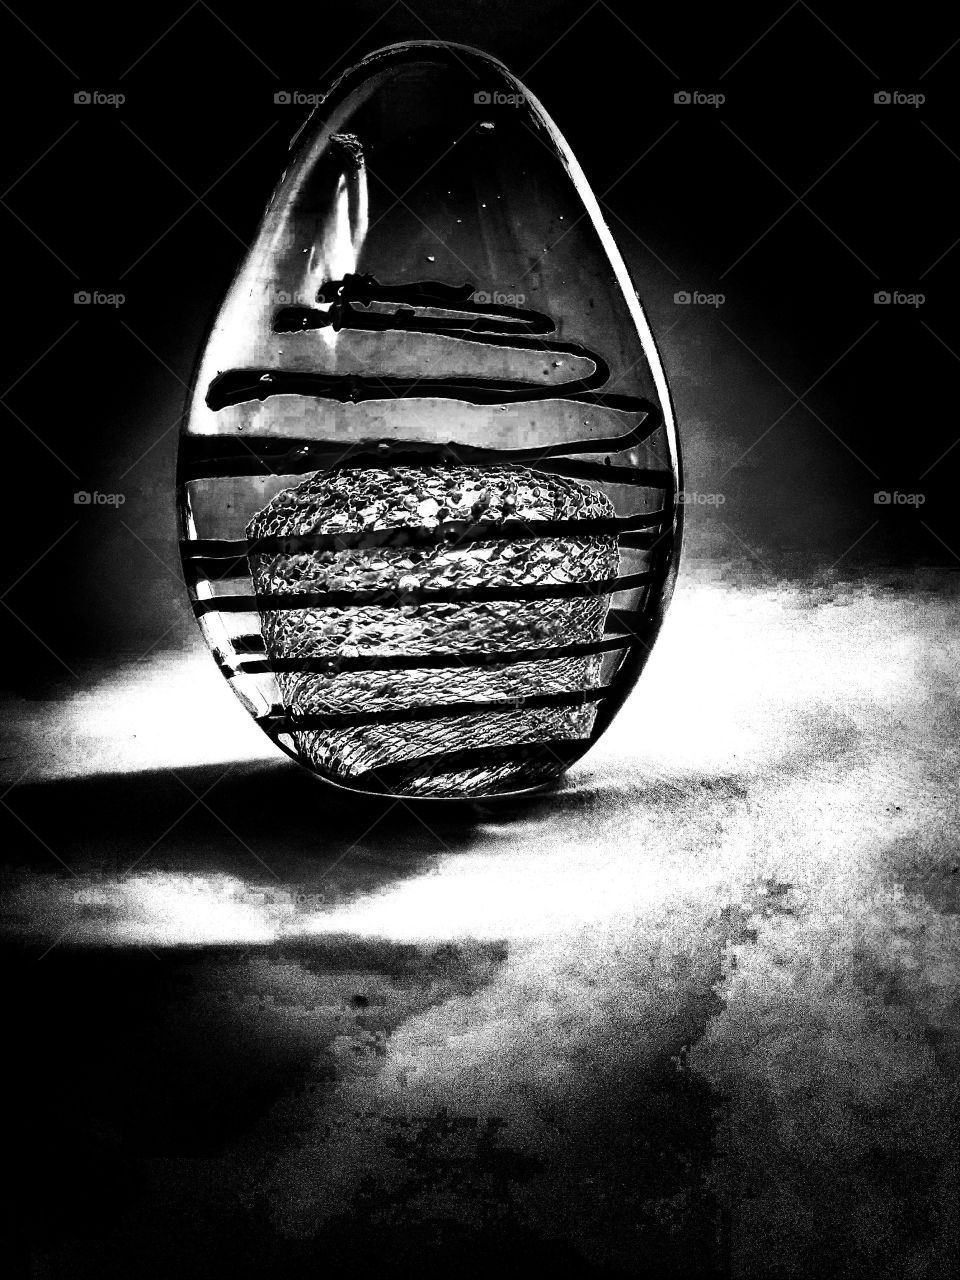 Black and white still life of an egg shaped glass art with a swirl inside and a mesh inside.